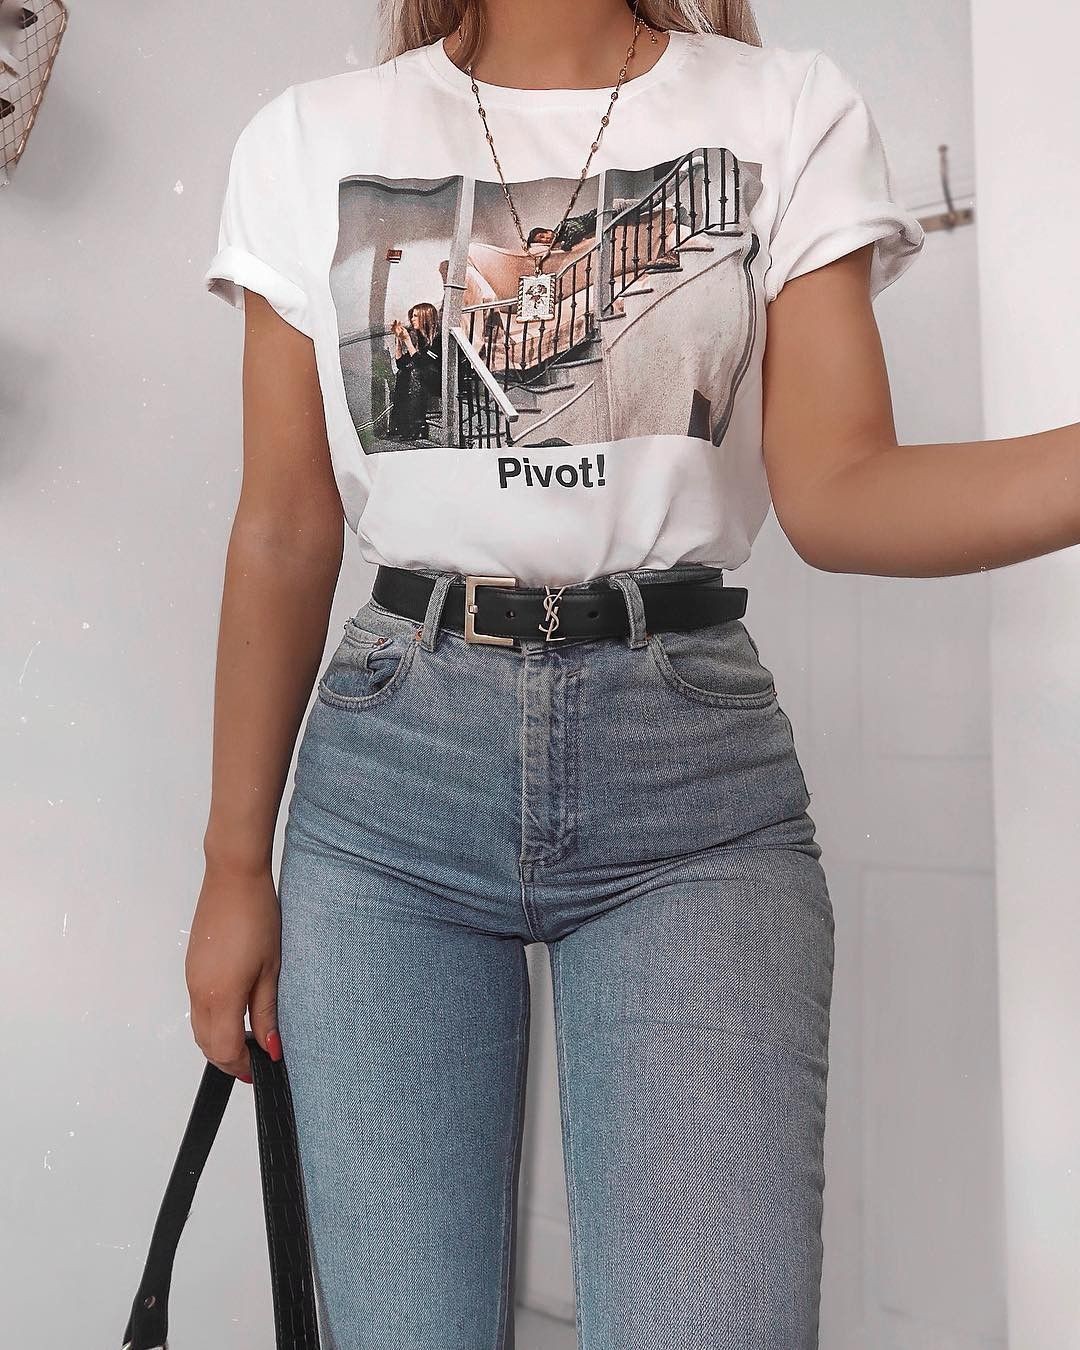 Aesthetic 90s grunge outfits, Grunge fashion | Casual ...